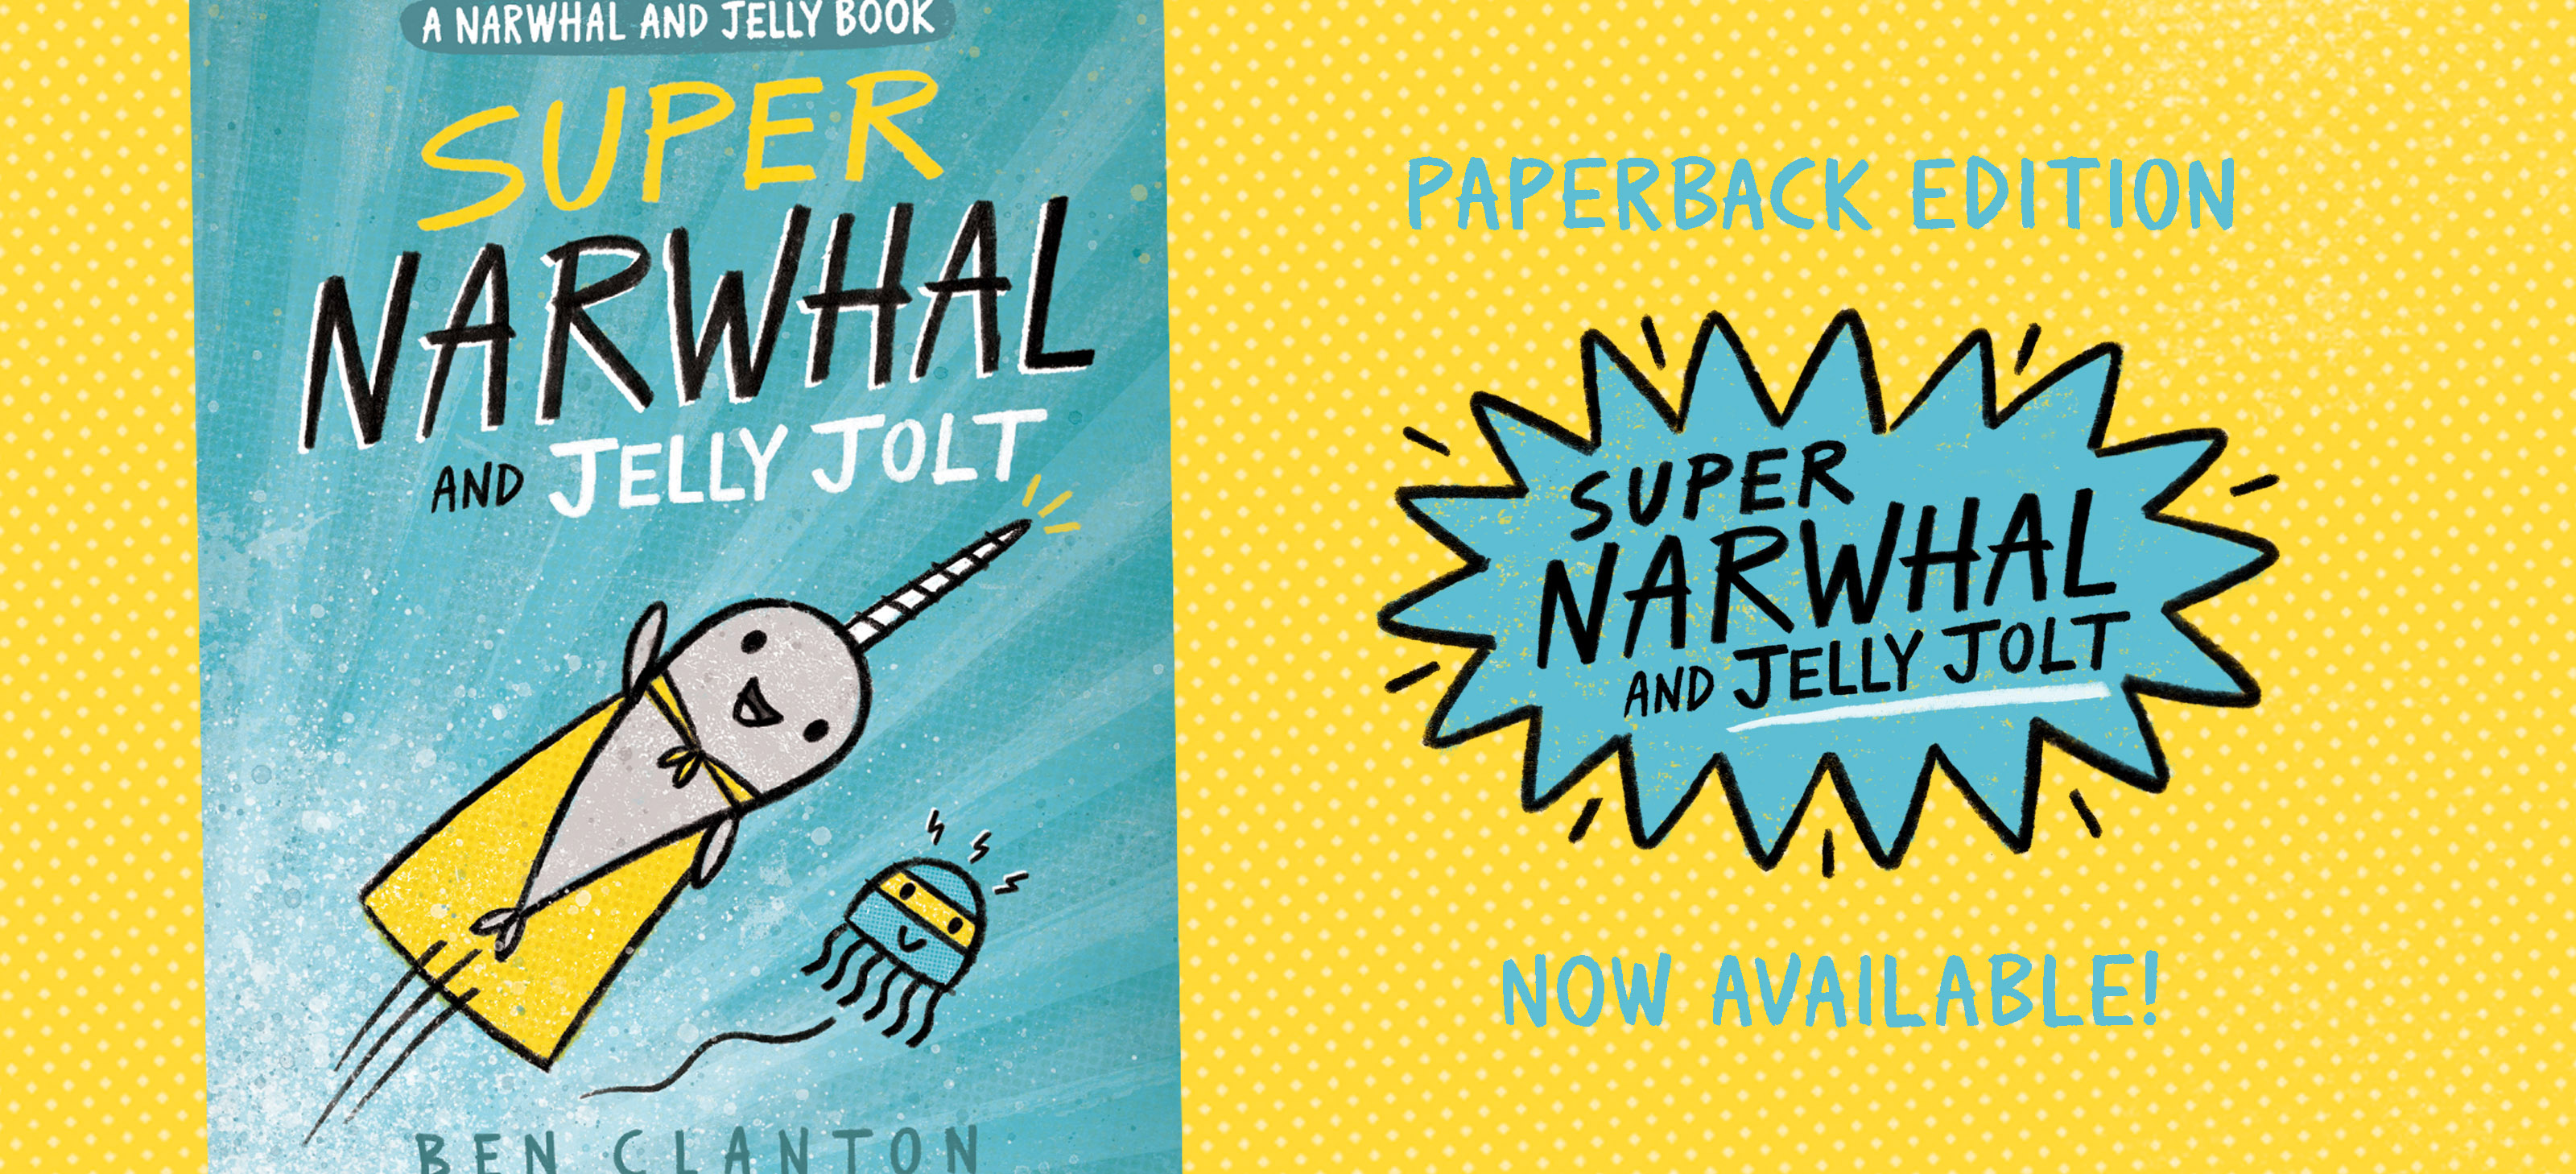 narwhal and jelly books